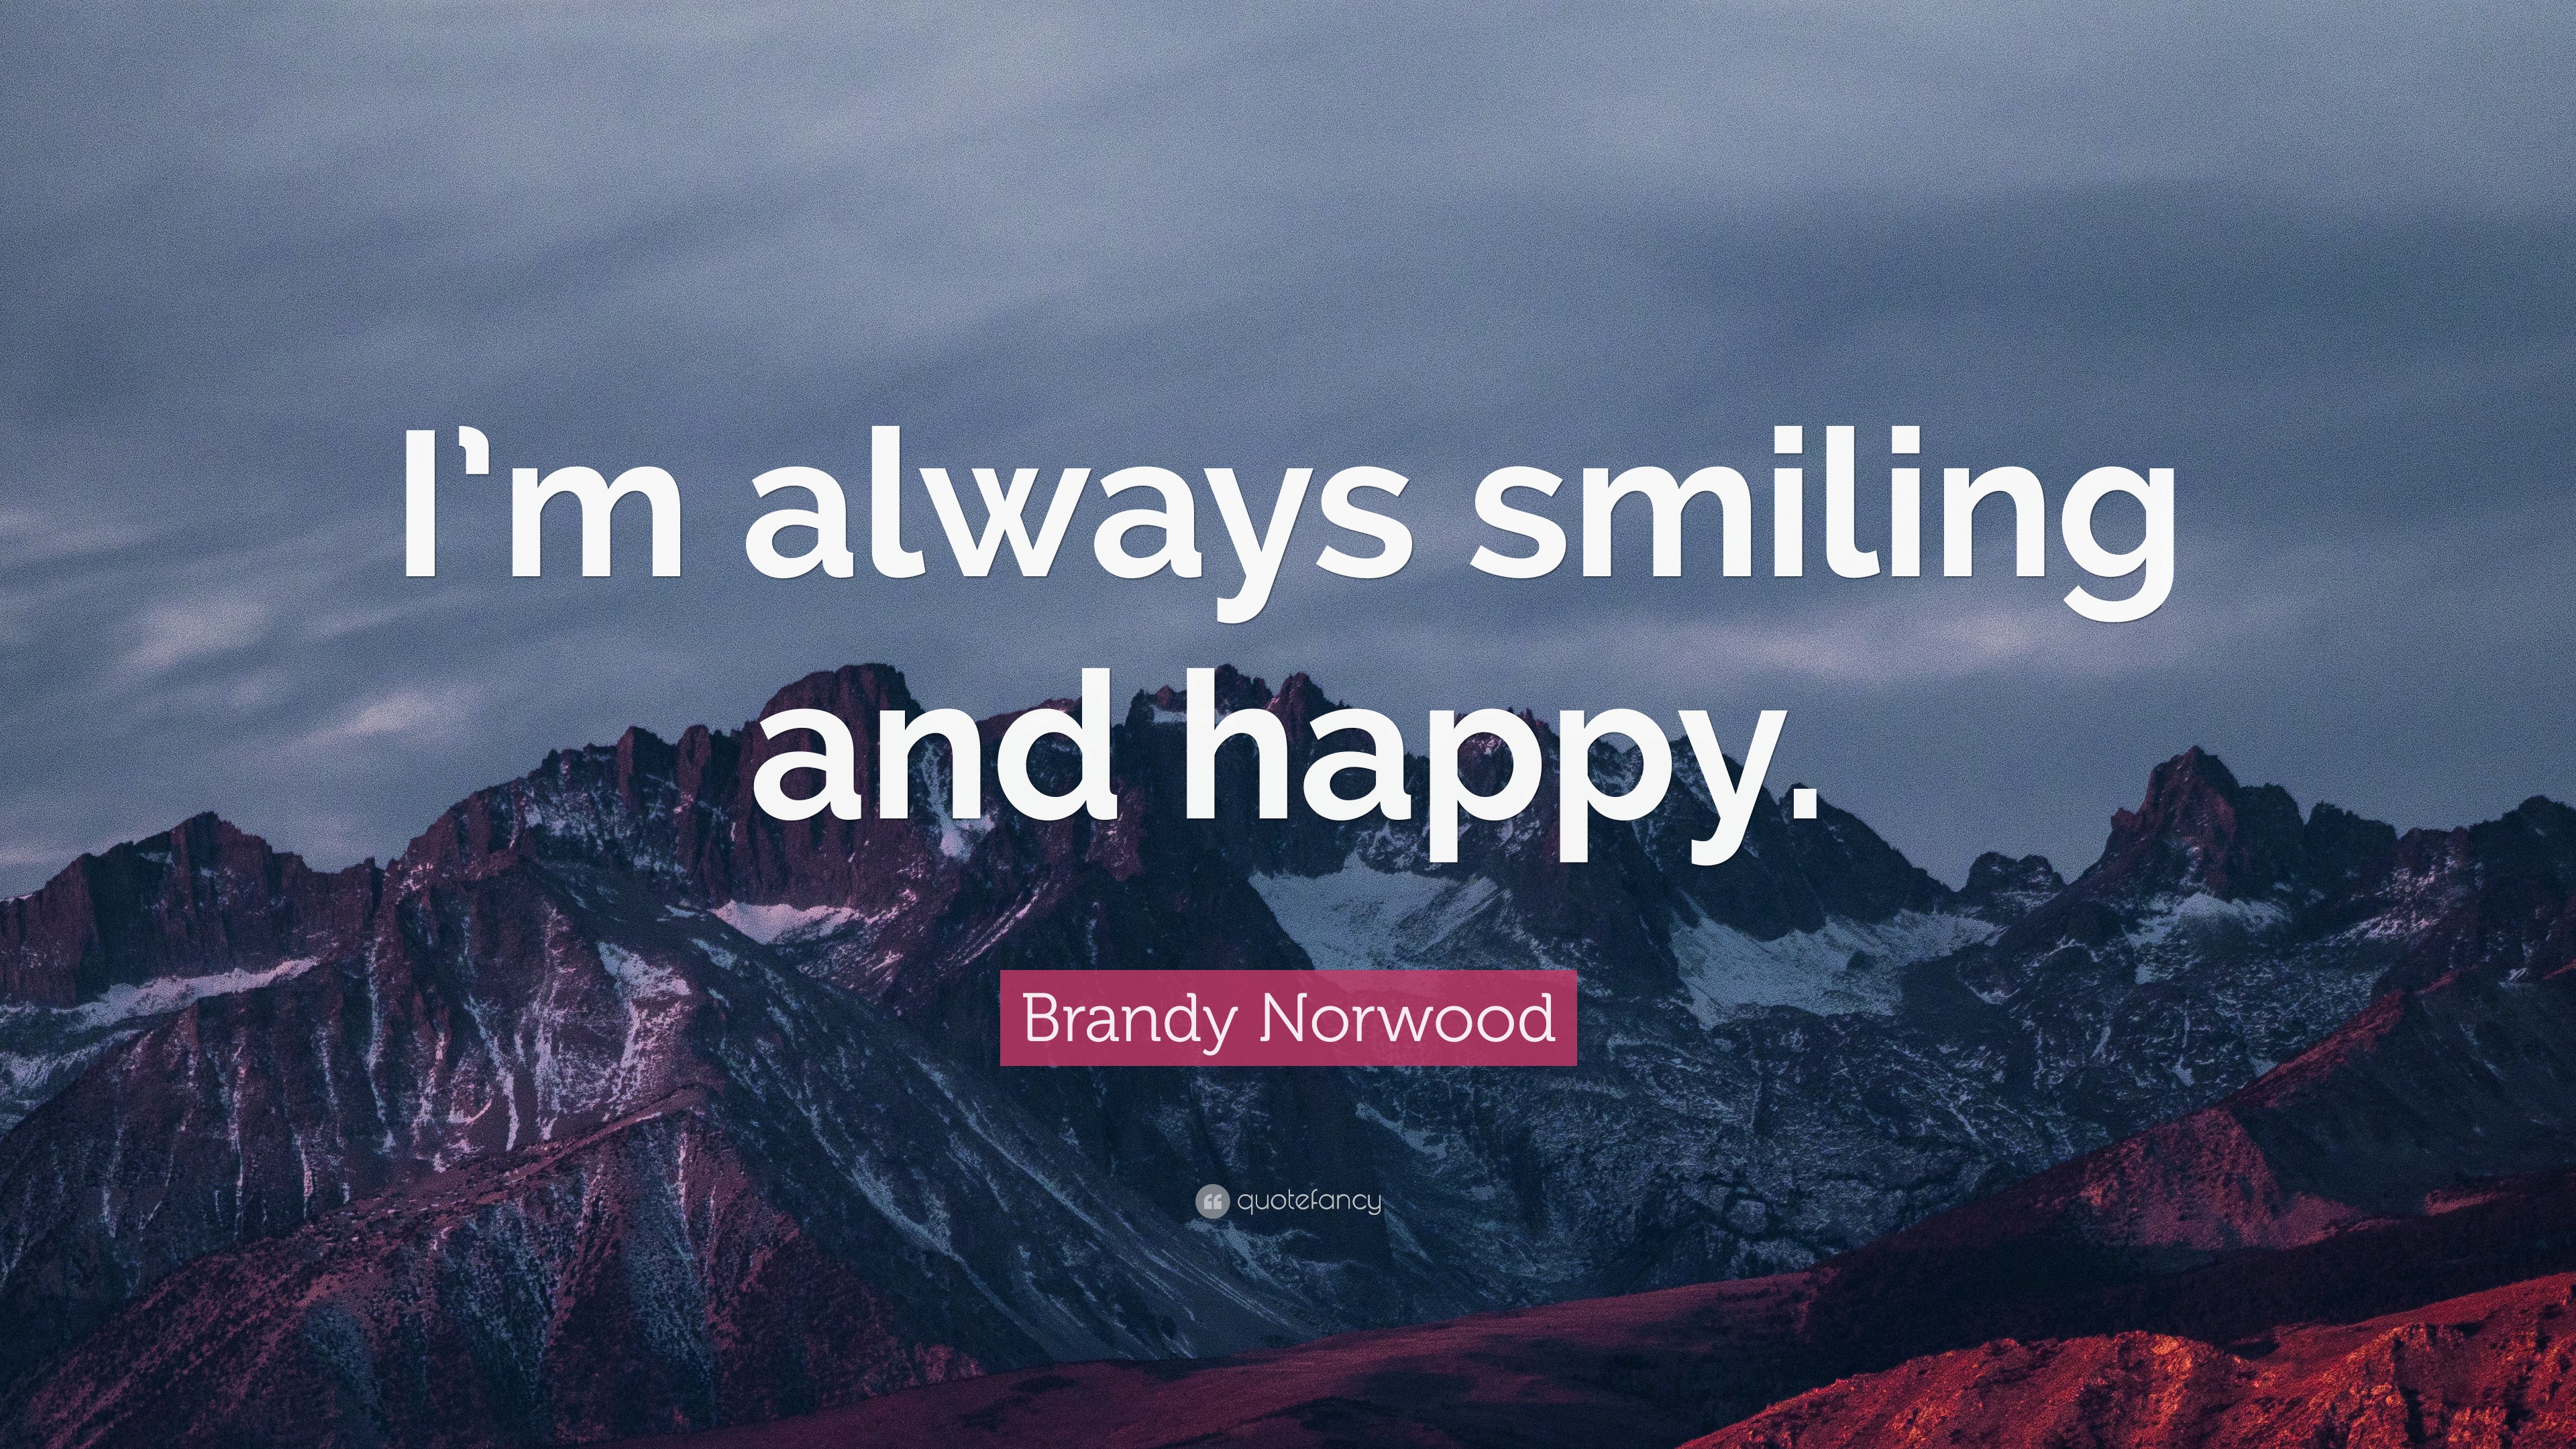 Brandy Norwood Quote: “I'm always smiling and happy.”